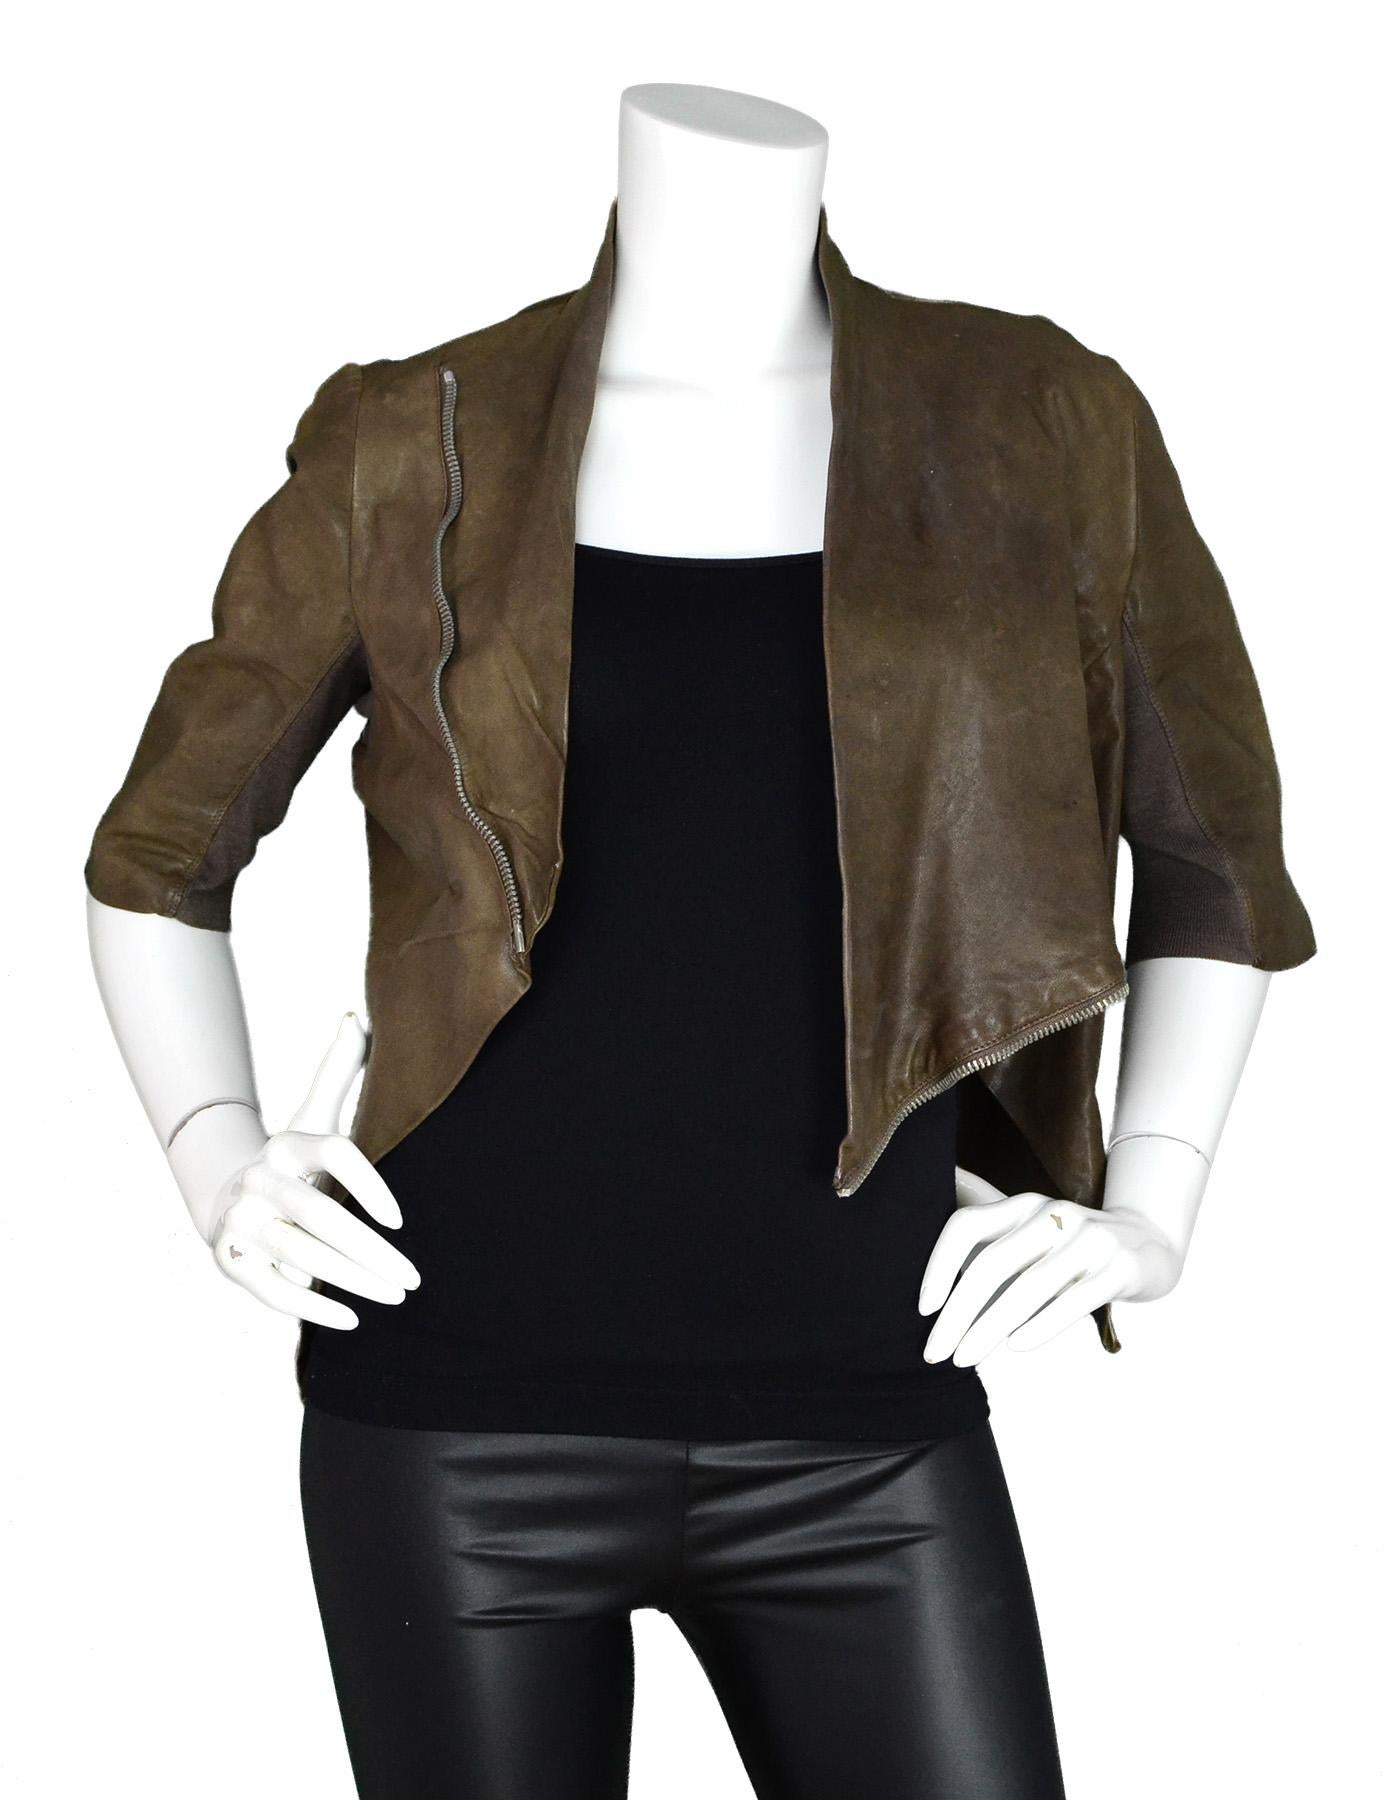 Rick Owens Brown Leather Crop 3/4 Sleeve Sleeve Jacket W/ Asymmetrical Zipper & Cowl Neck Sz M

Color: Brown
Materials: Leather (no composition tag)
Lining: Brown nylon textile (no composition tag)
Opening/Closure: Antiqued silvertone asymmetrical